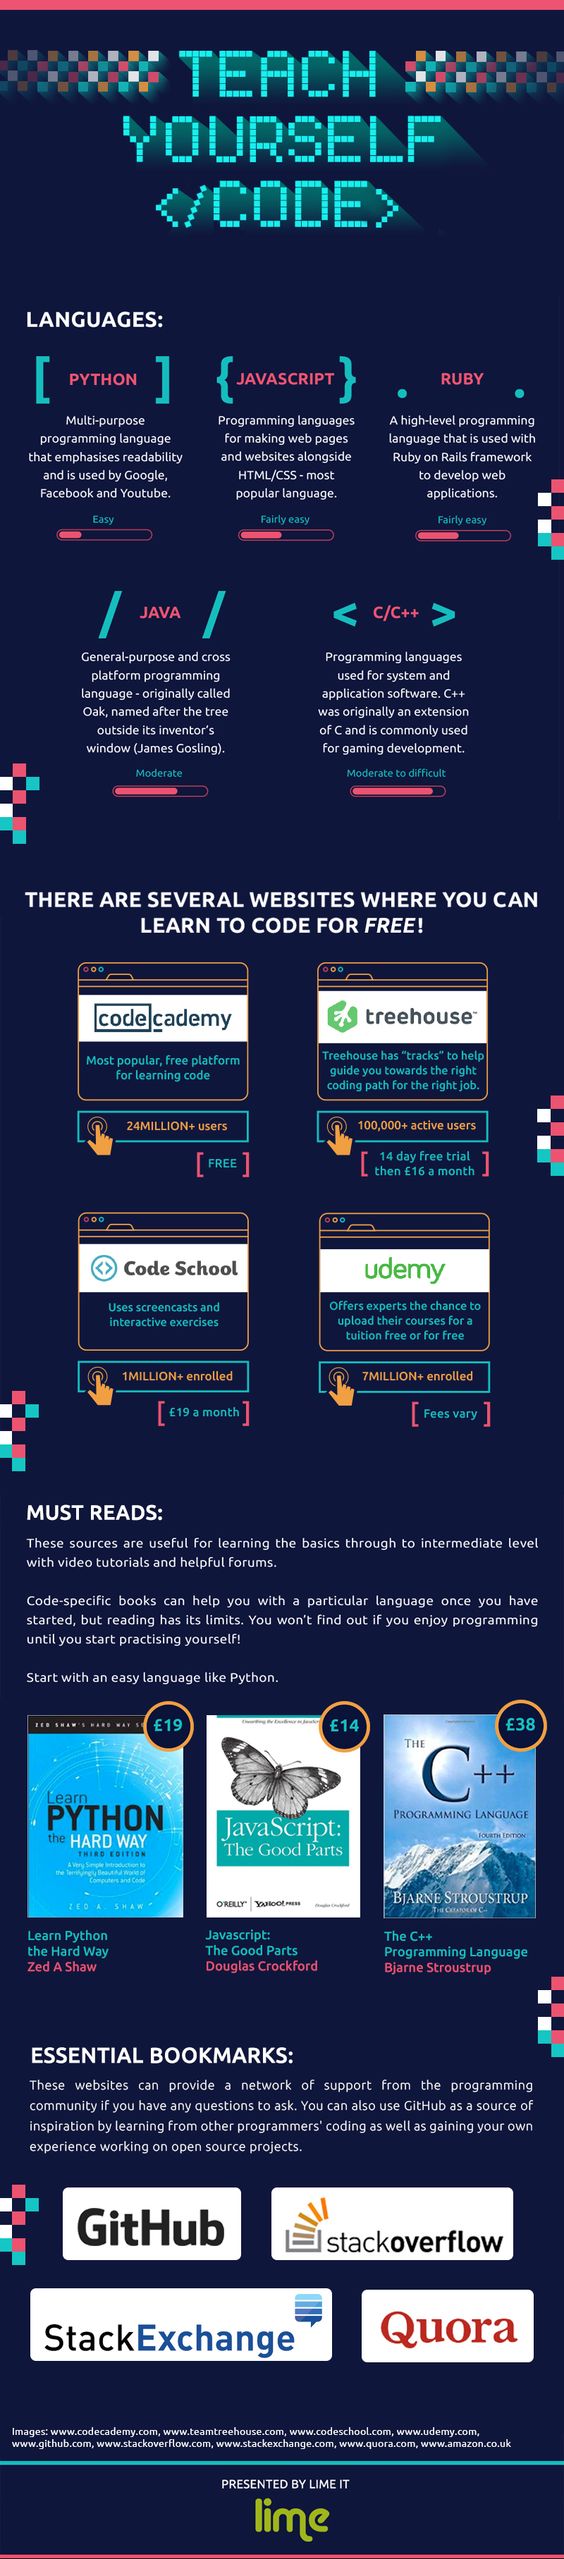 The How to Teach Yourself Code Infographic presents sources to help you decide what programming language is best for you and how you can learn from others.